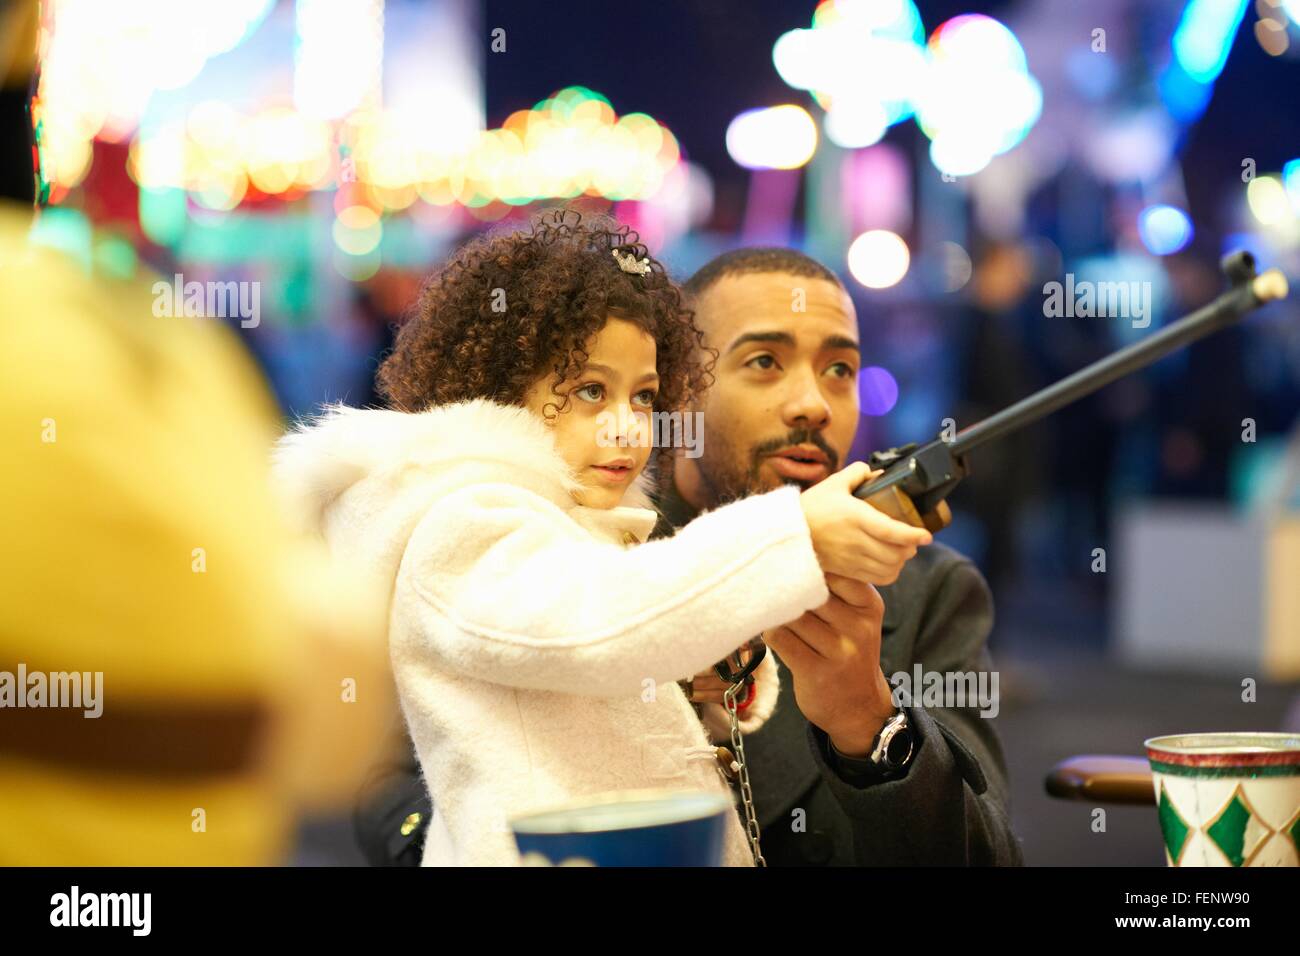 Father helping daughter with rifle at shooting gallery at funfair Stock Photo